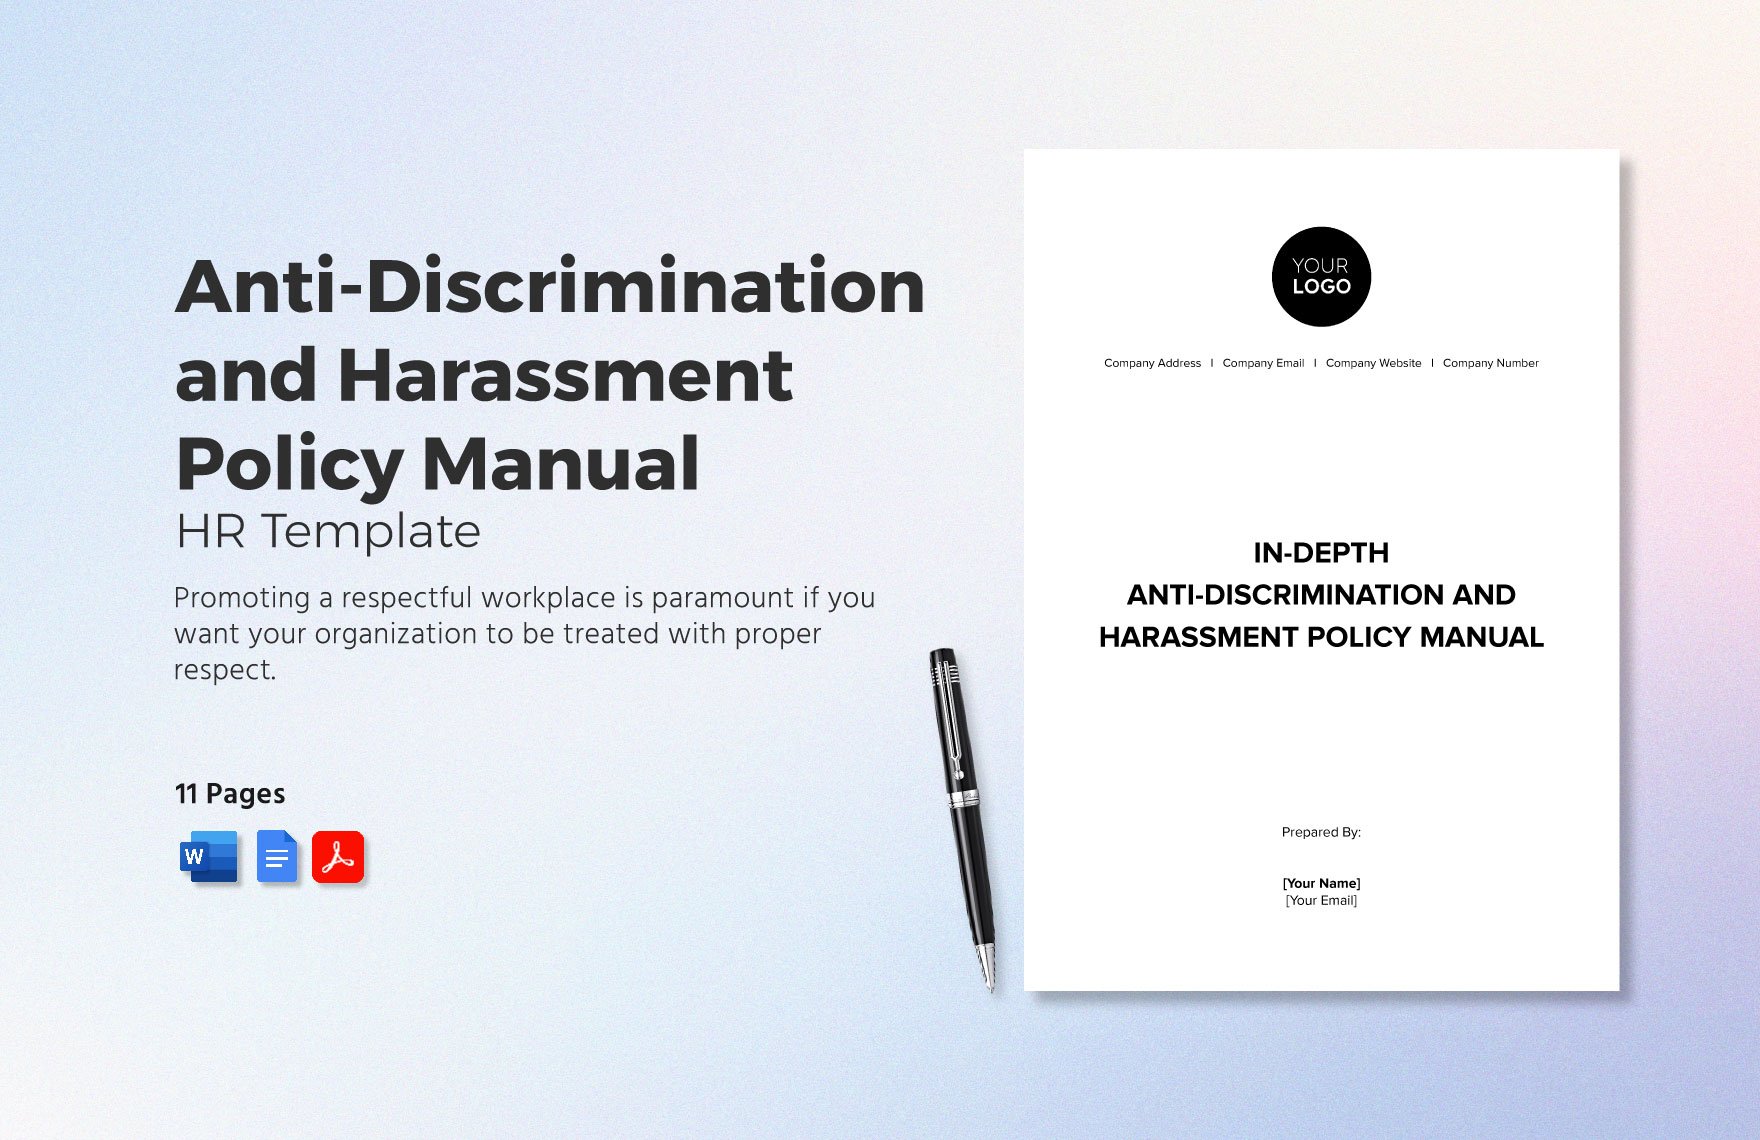 Anti-Discrimination and Harassment Policy Manual HR Template